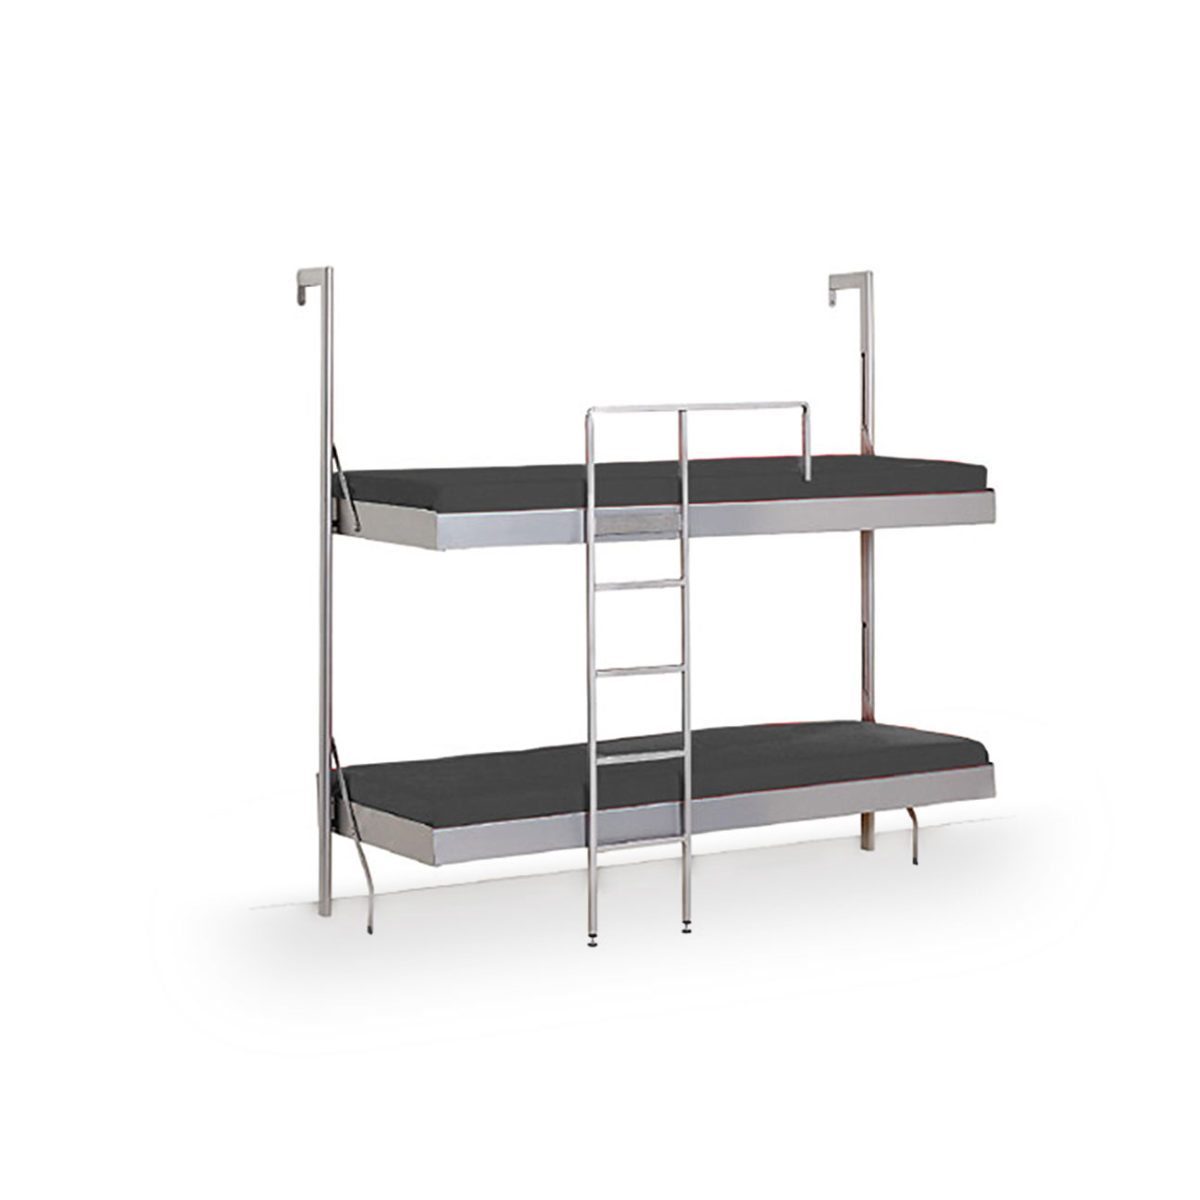 Compatto Murphy Bunk Bed From Italy, Side By Side Bunk Beds